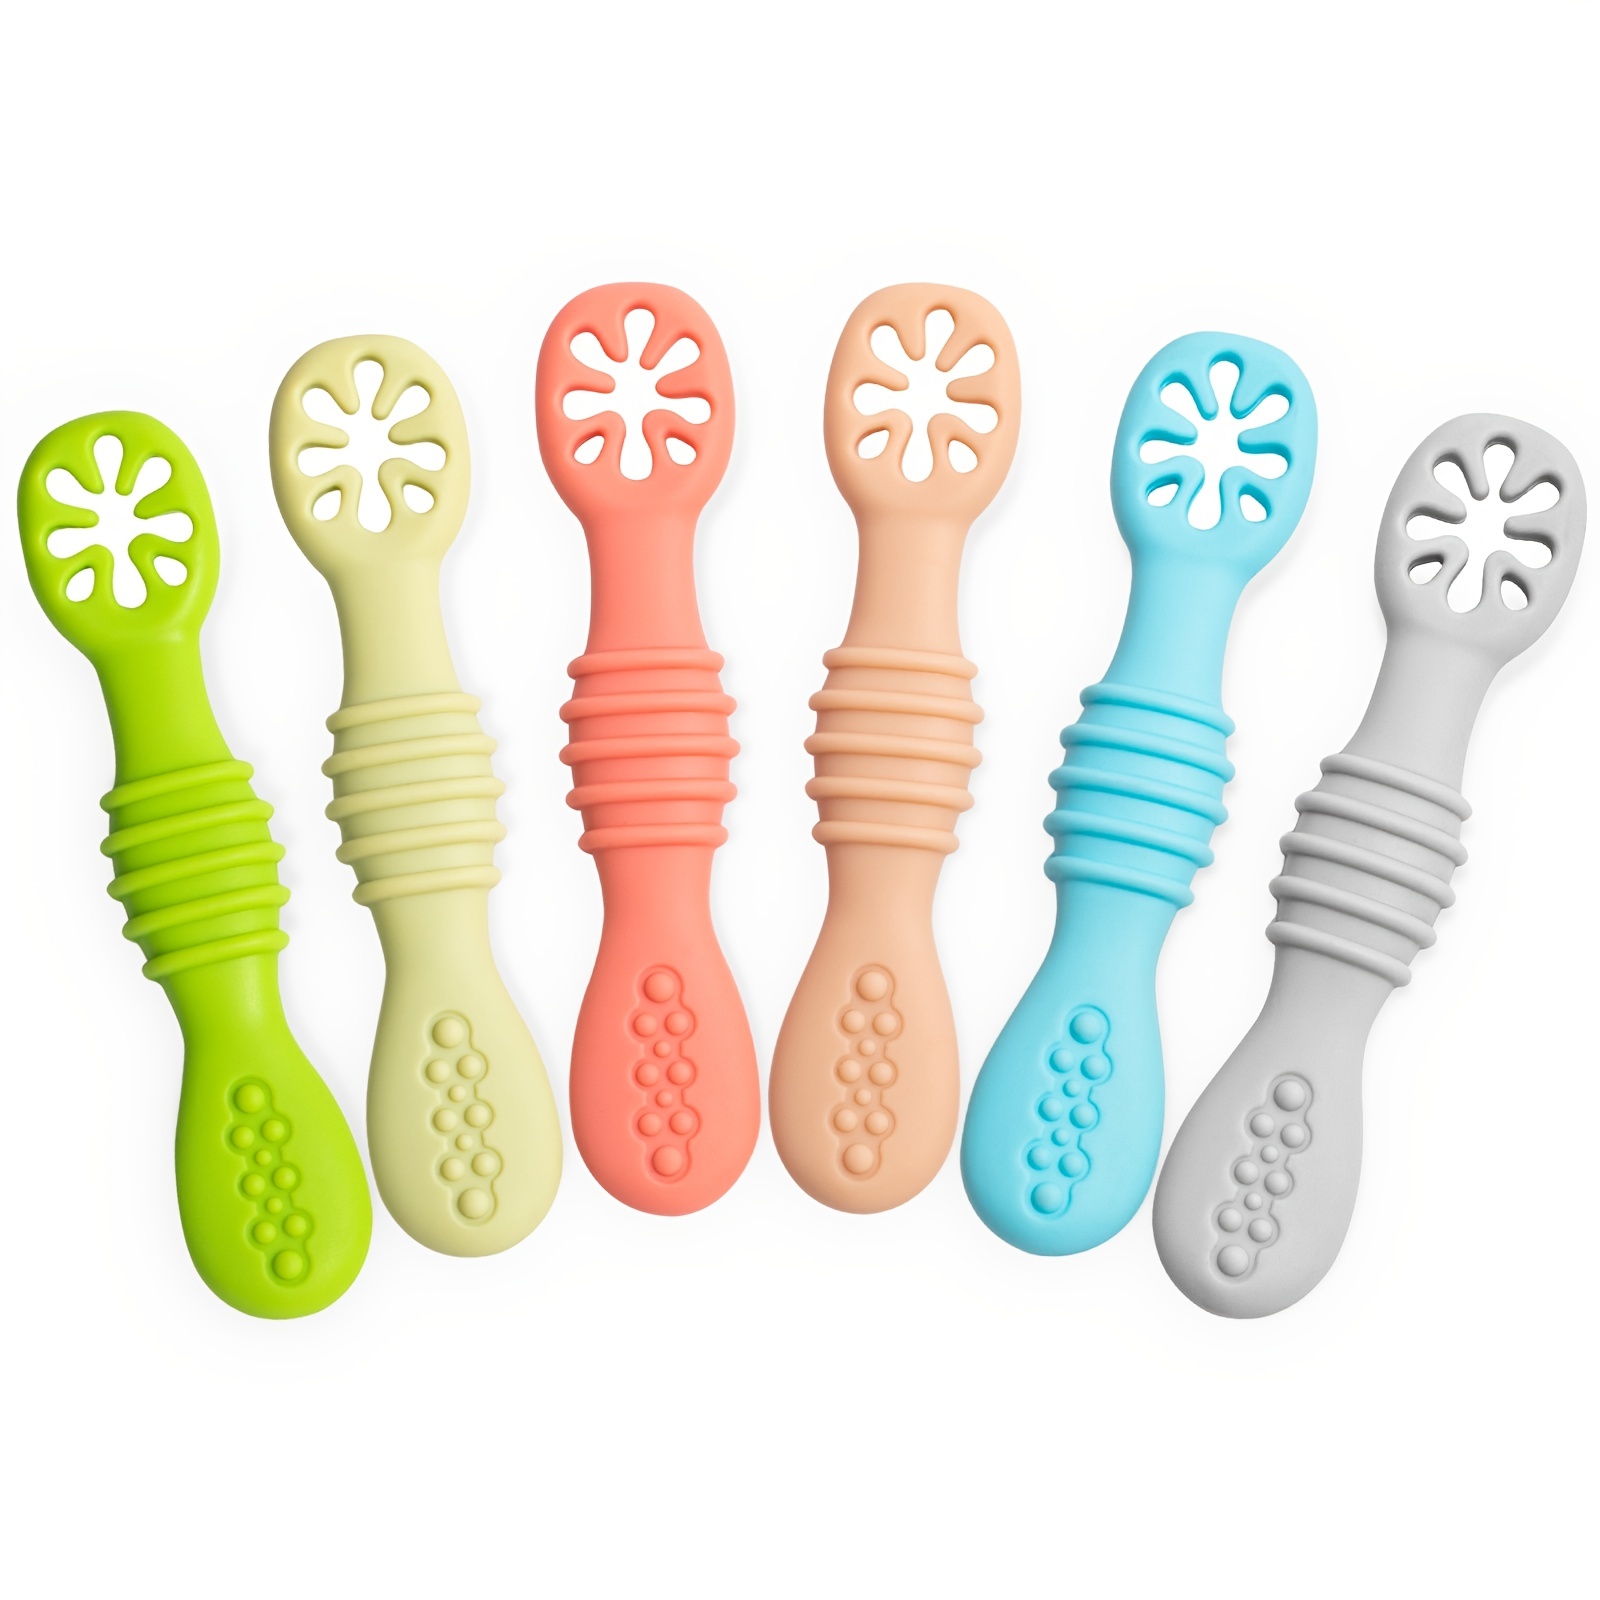 6 Pcs Silicone Baby Spoons | Baby Led Weaning Spoons | Self Feeding Toddlers Utensils | BPA Free Ages 4 Months